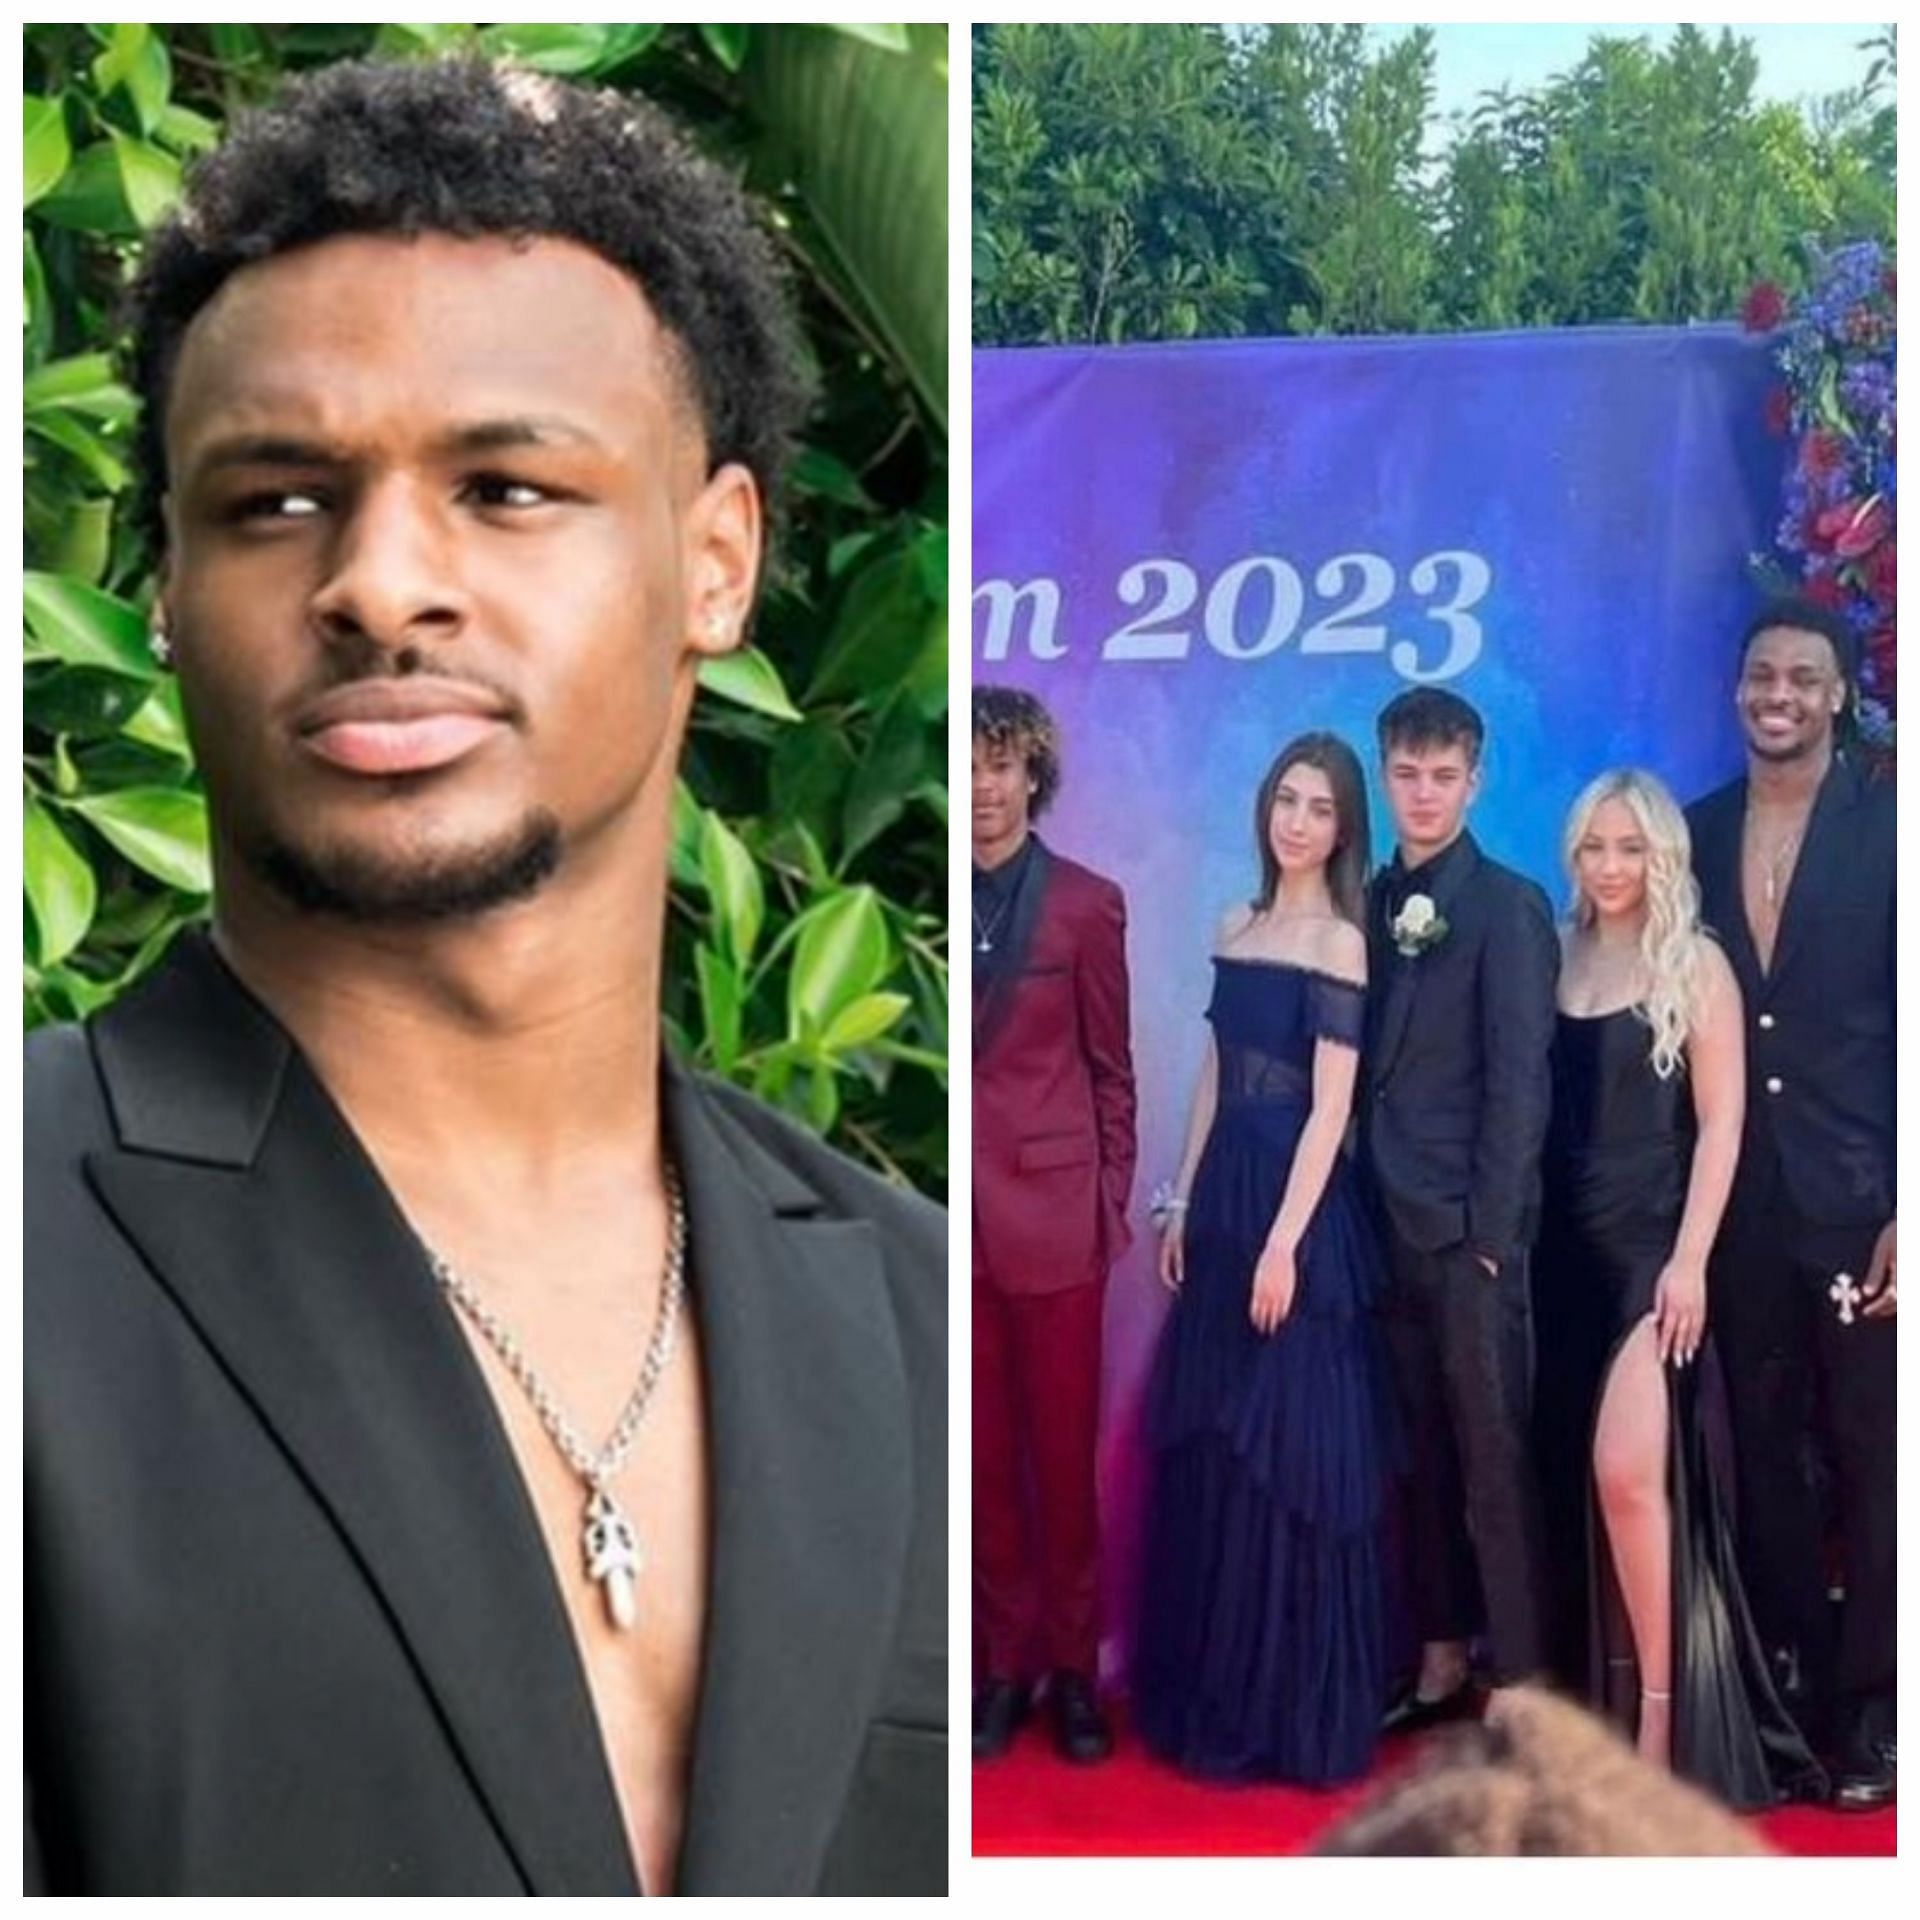 Photos: Bronny James poses with his girlfriend for Prom 2023